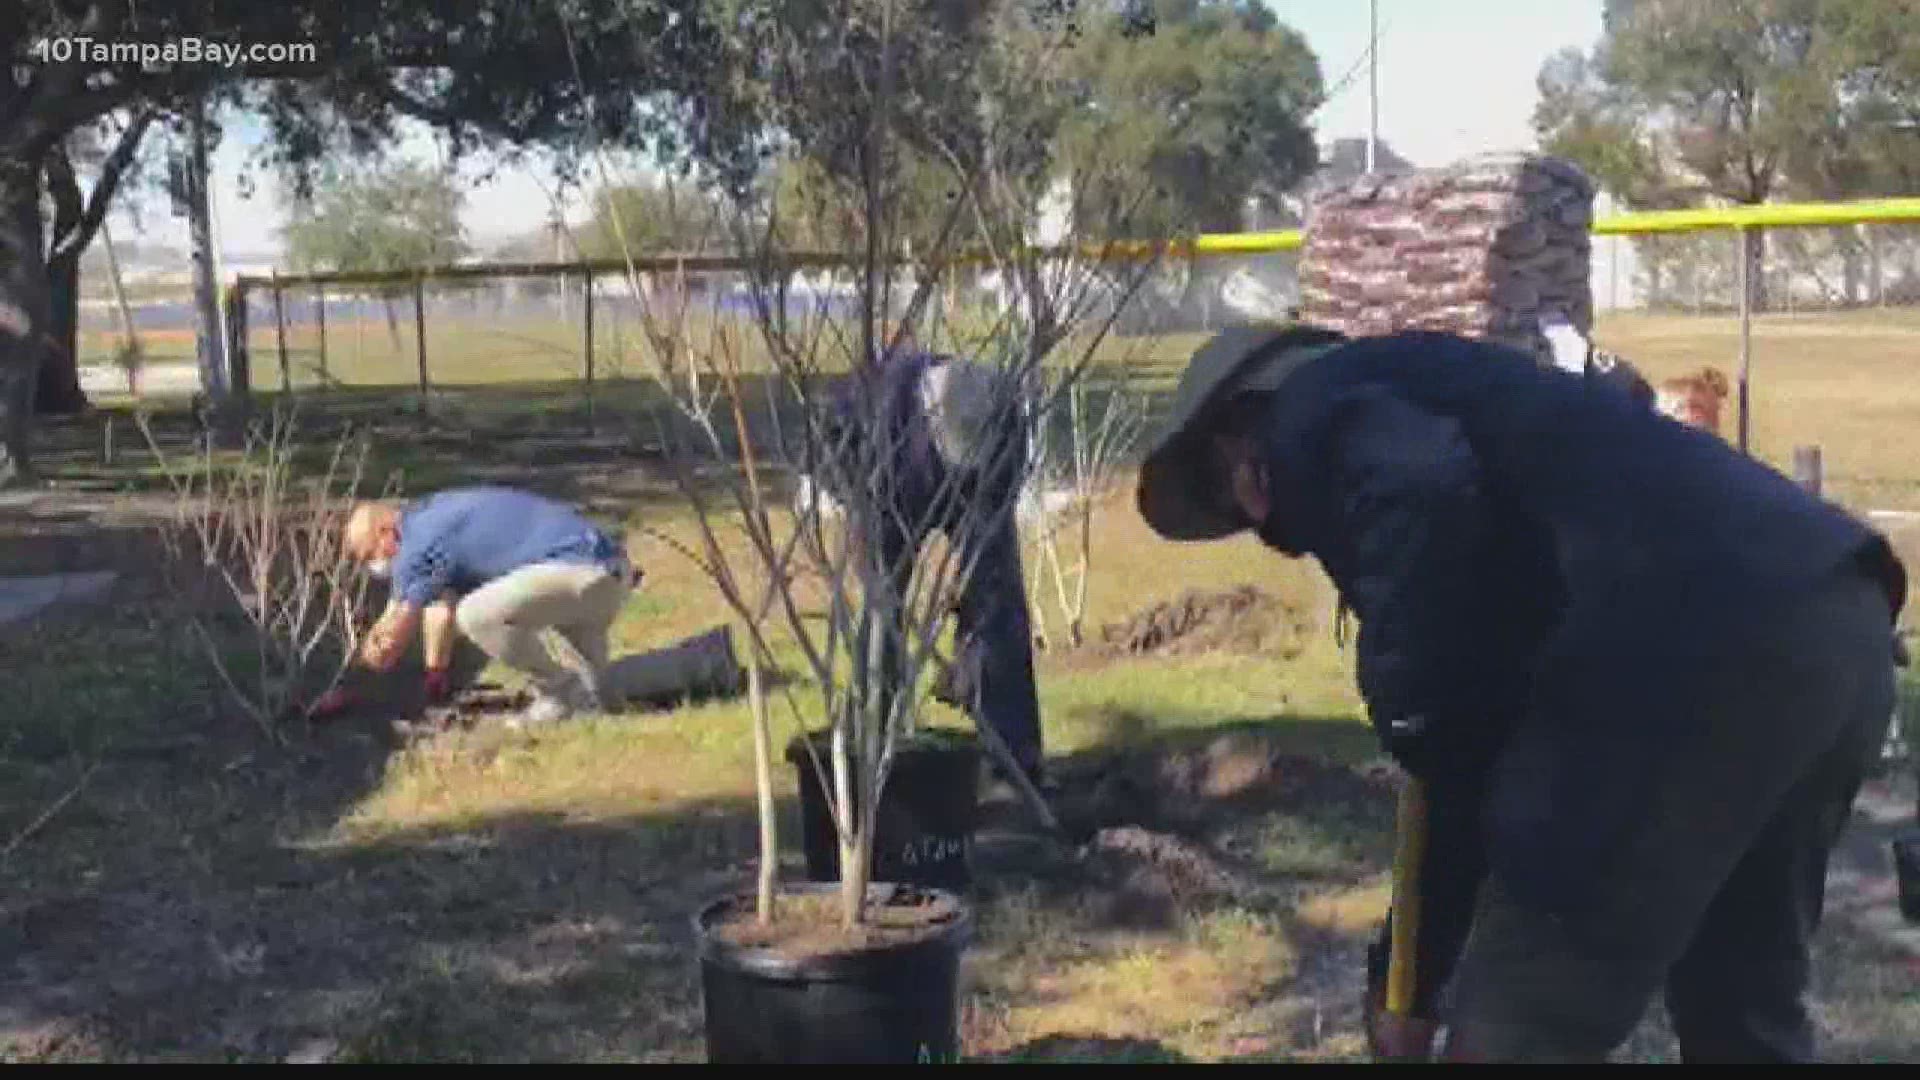 A brand new pollinator garden was installed just a couple of miles away from Raymond James Stadium at Wellswood Park.